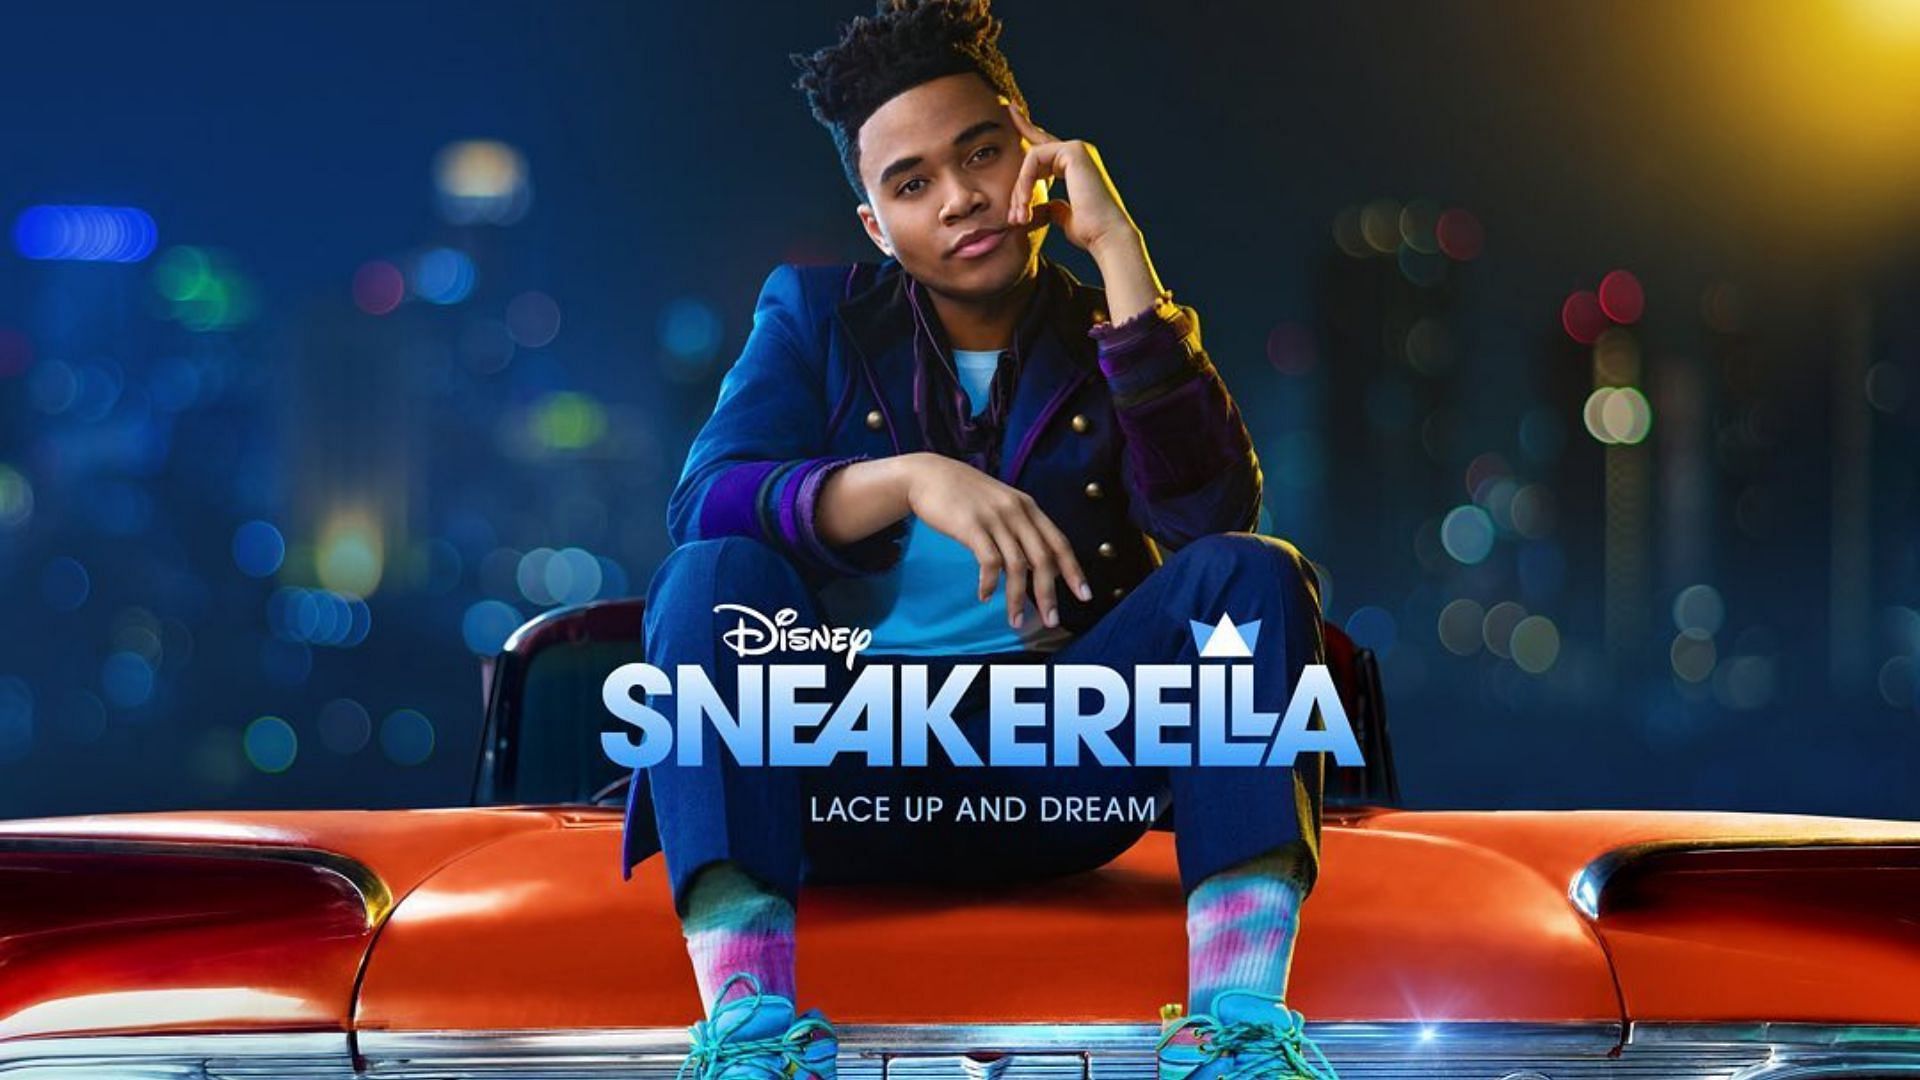 The promotional poster for Sneakerella, arriving this May 13, 2022, on Disney + (Image Via chosenjacobs/Instagram)